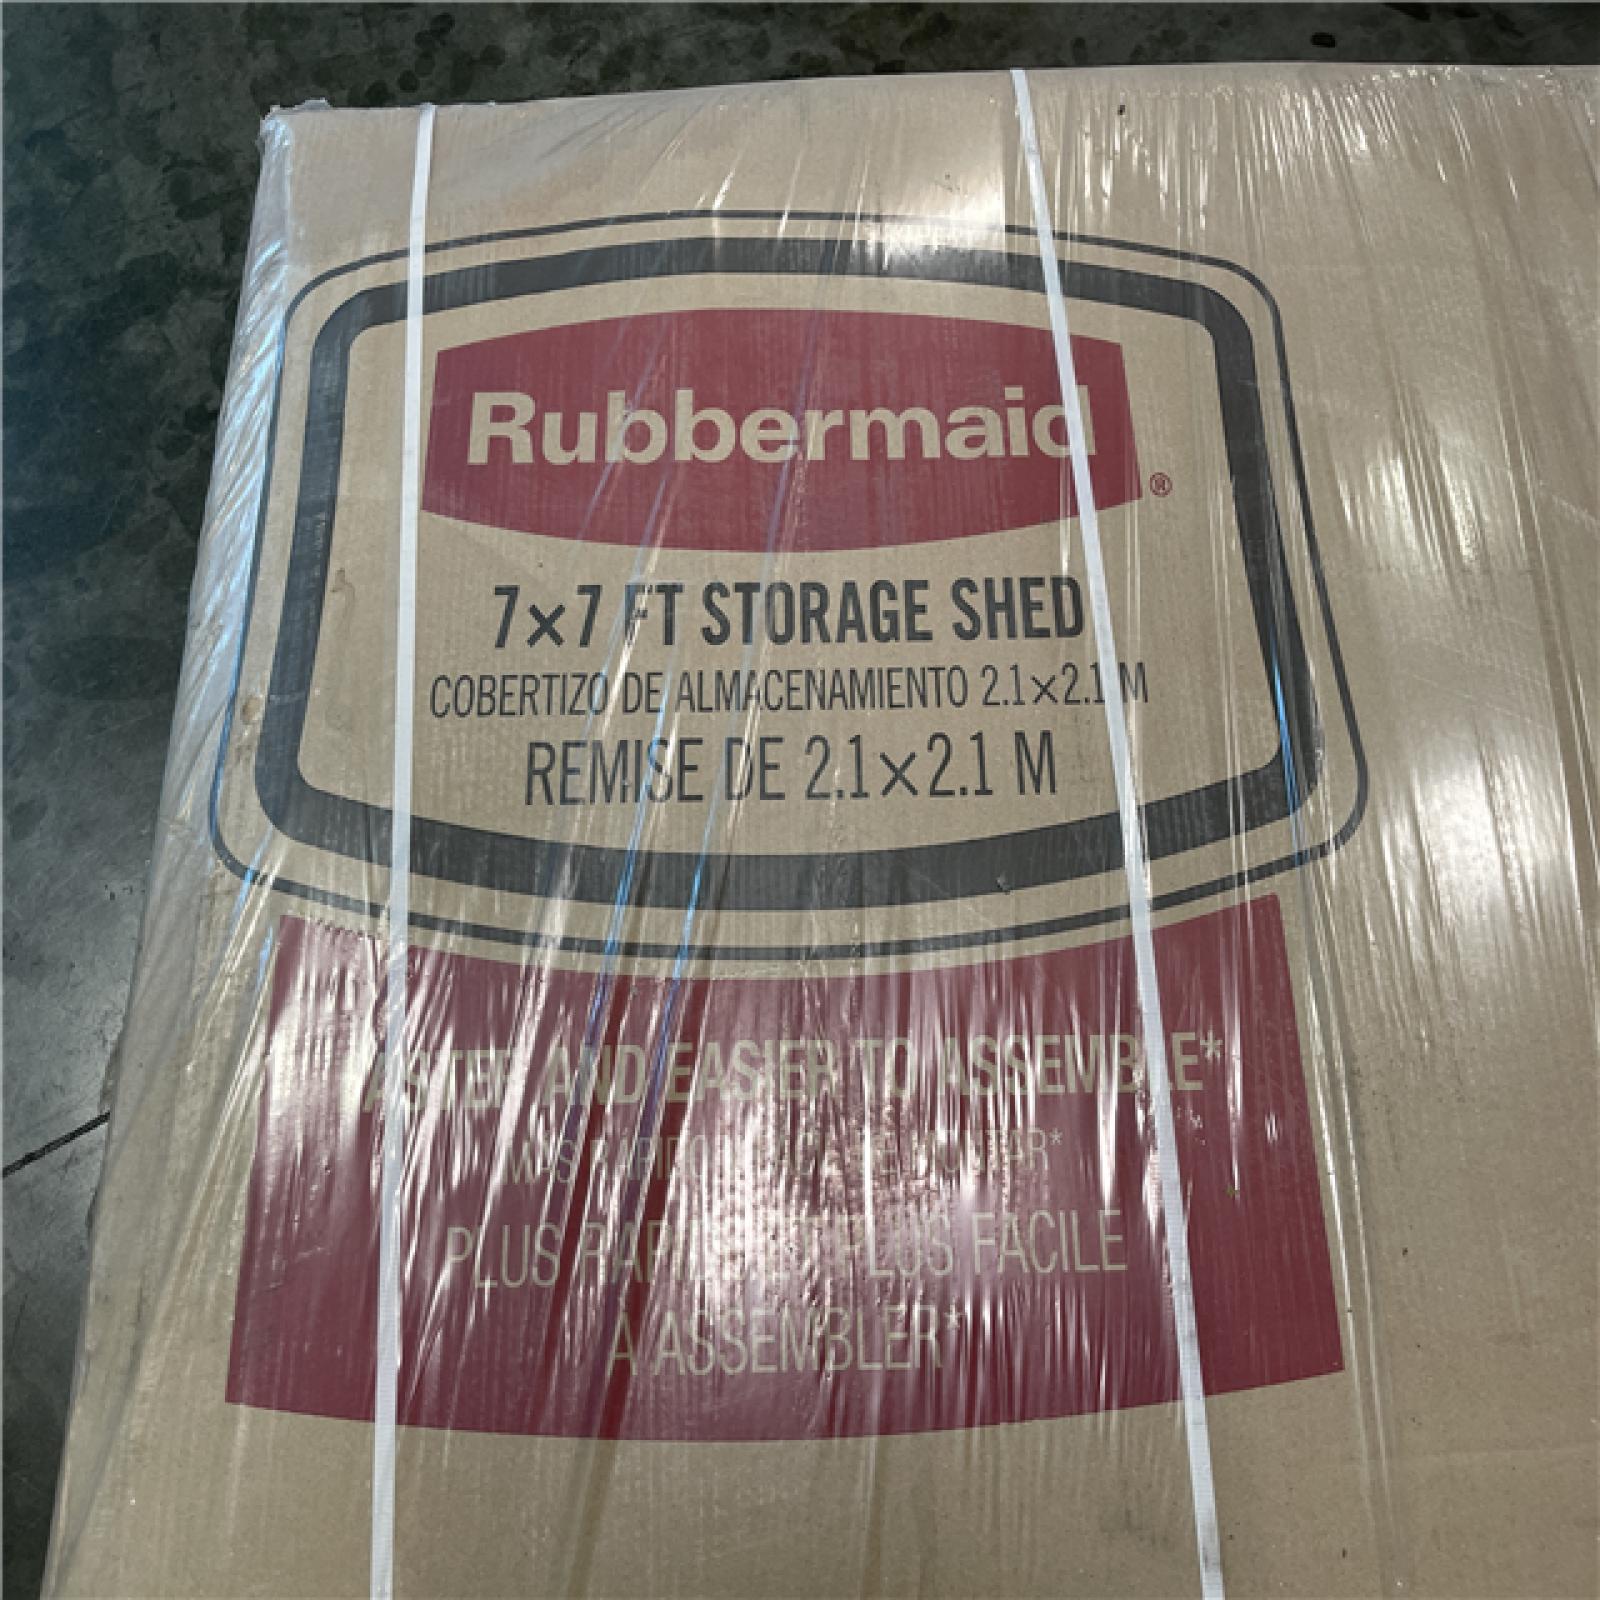 California AS-IS Rubbermaid 7 x 7 Ft. Storage Shed